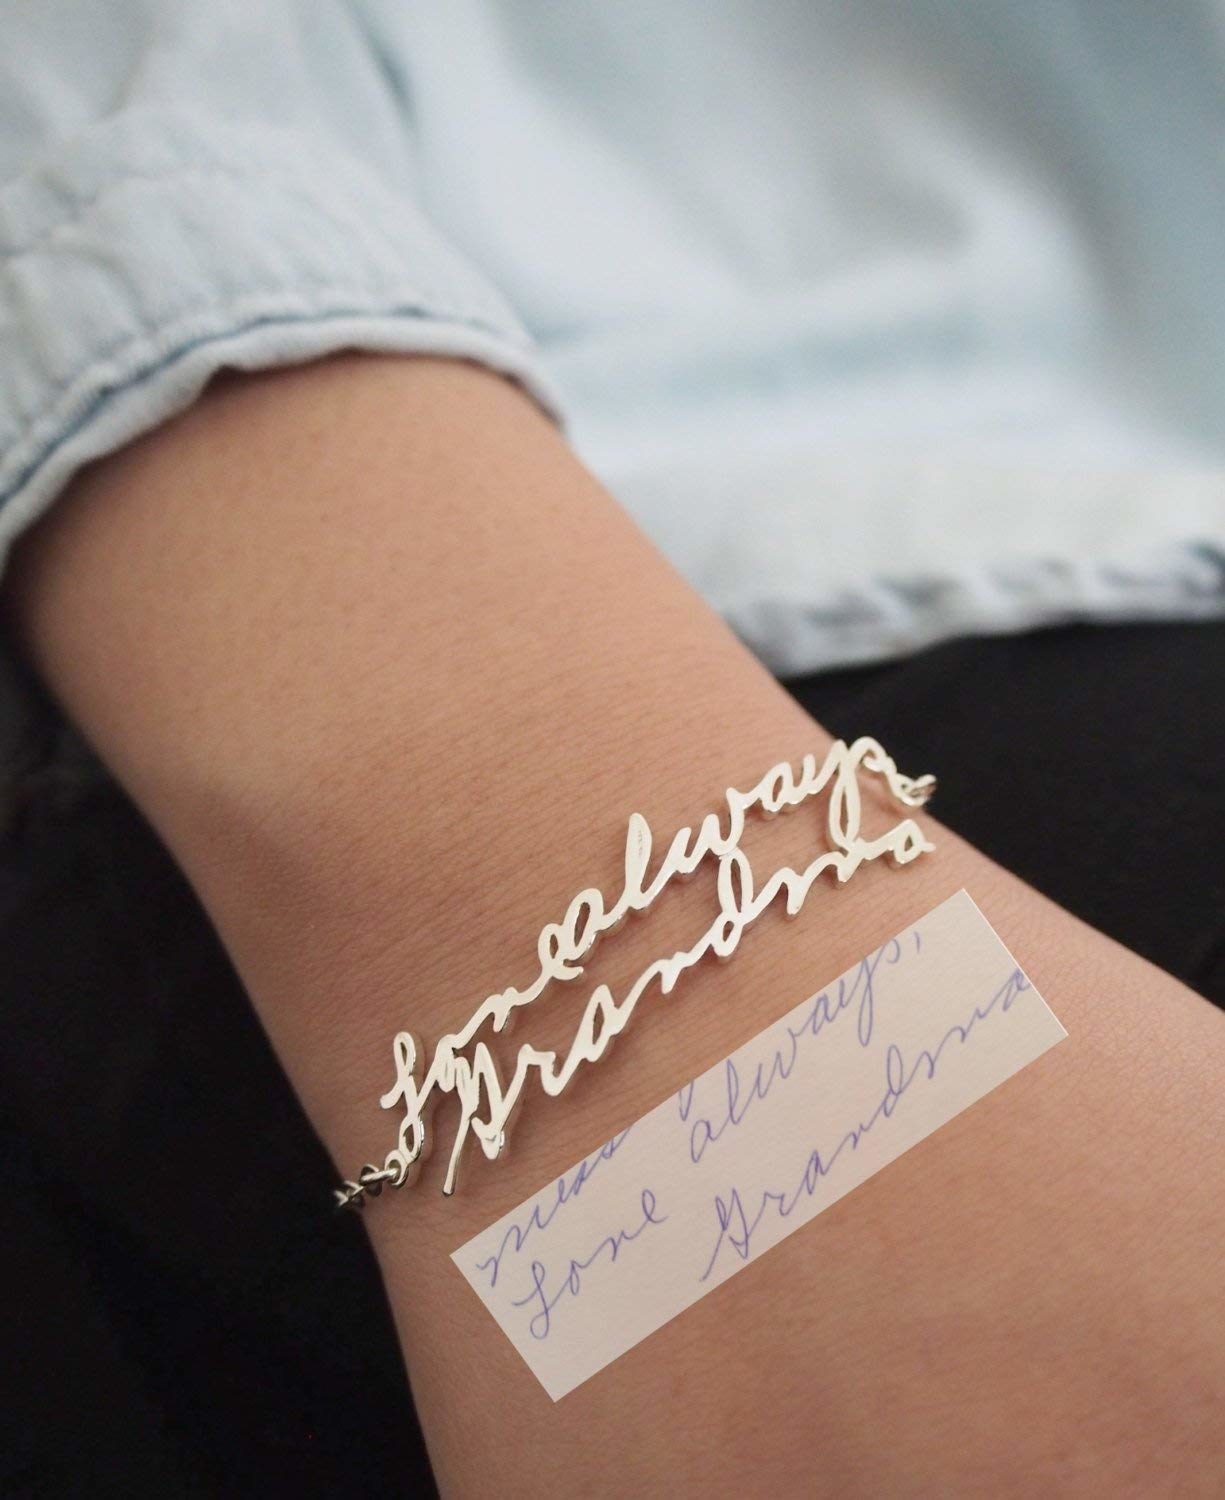 A model wearing one of the bracelets next to the writing sample they used to create it